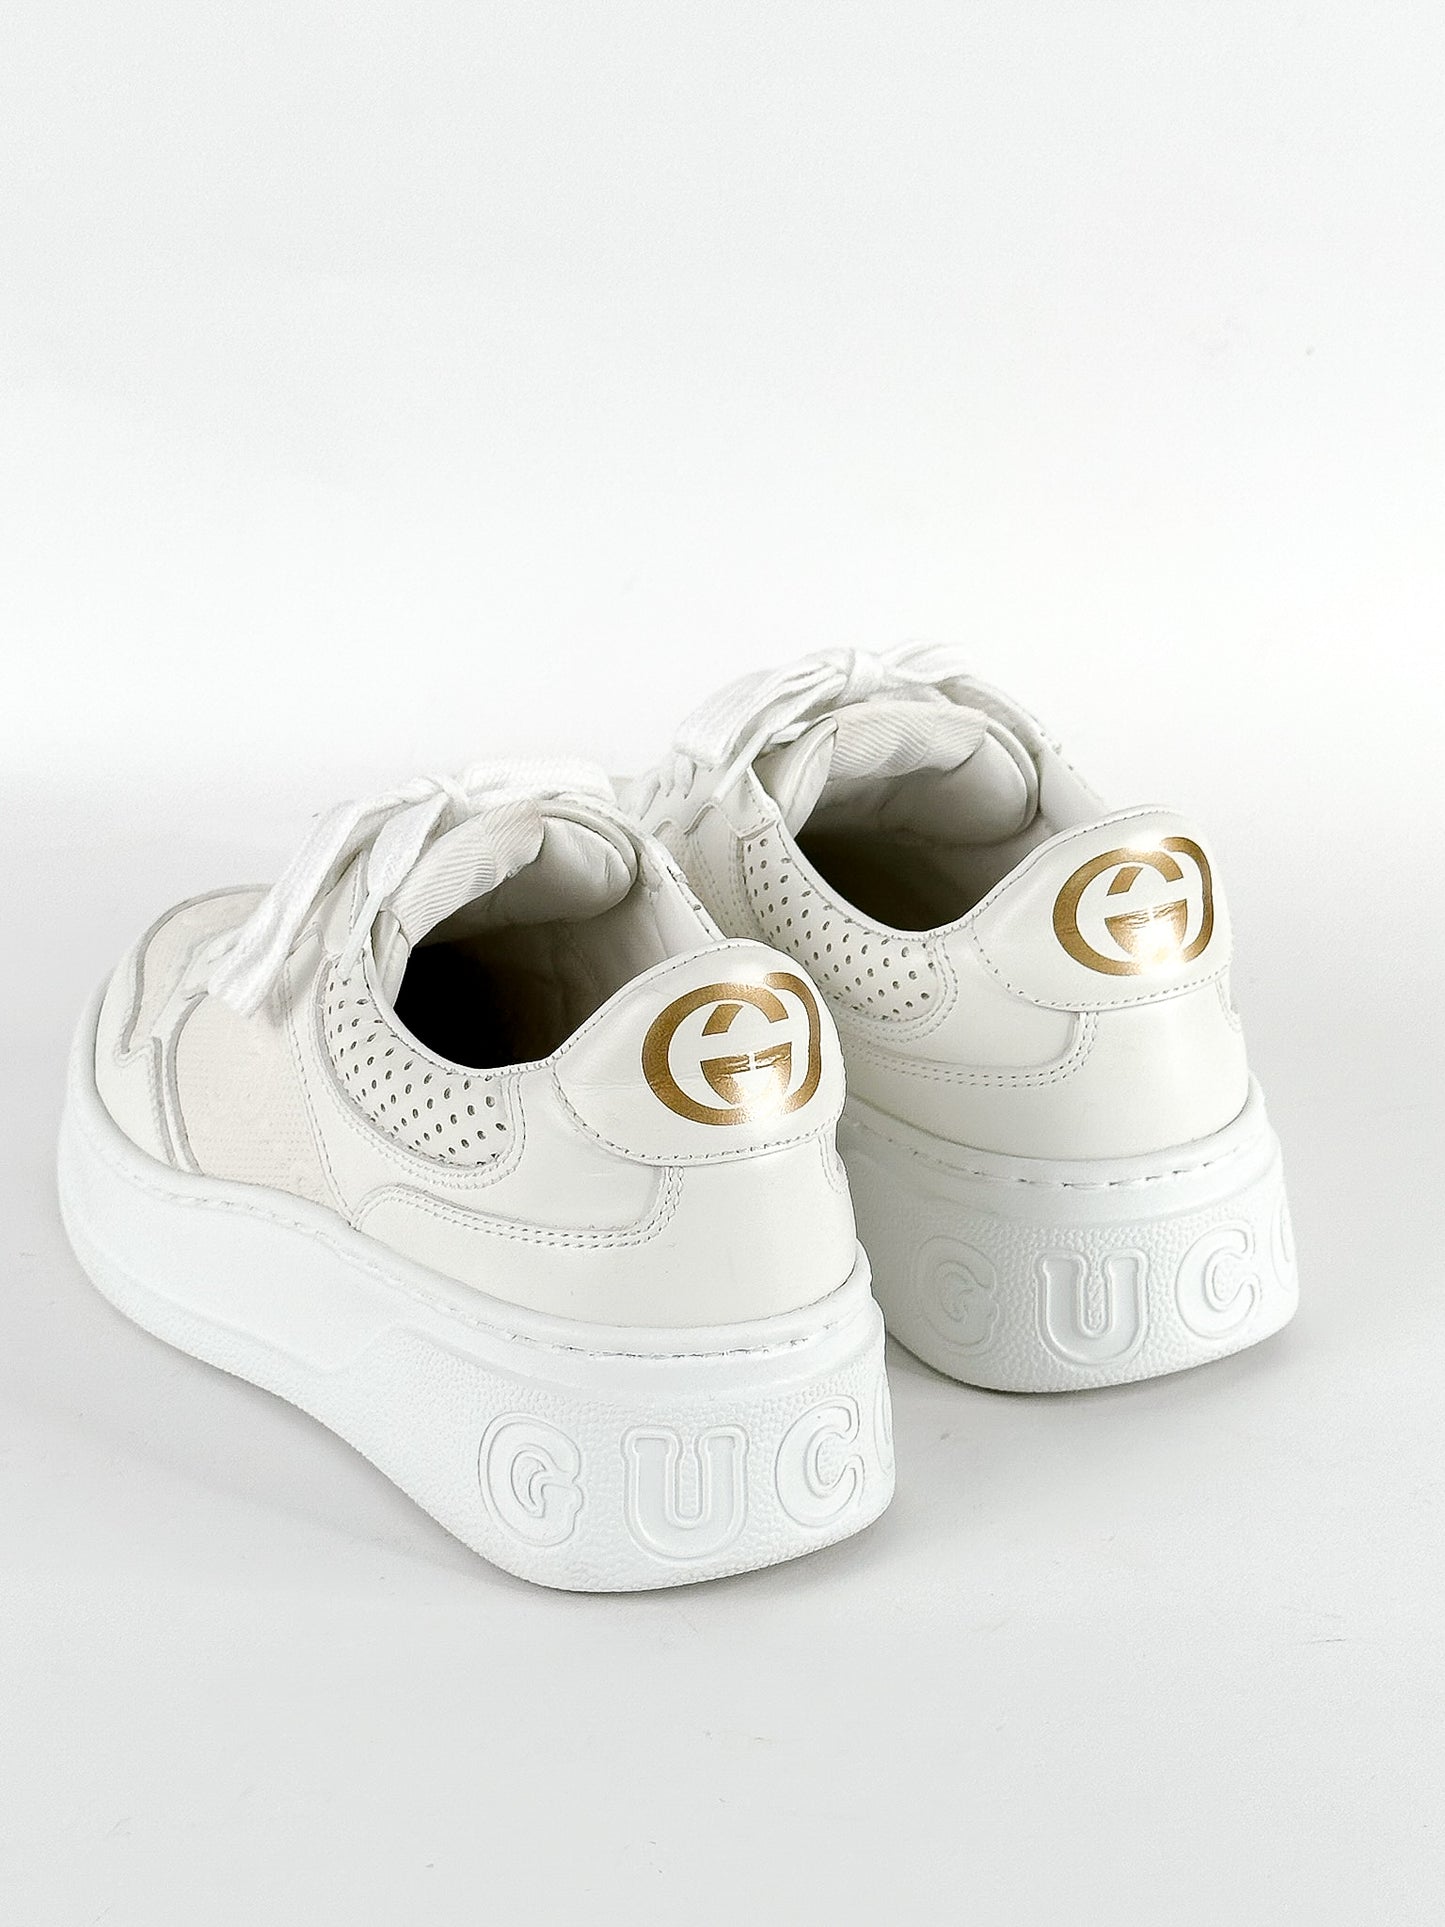 Gucci White Leather GG Embossed
Perforated Leather Trainers Sneakers
Size 35